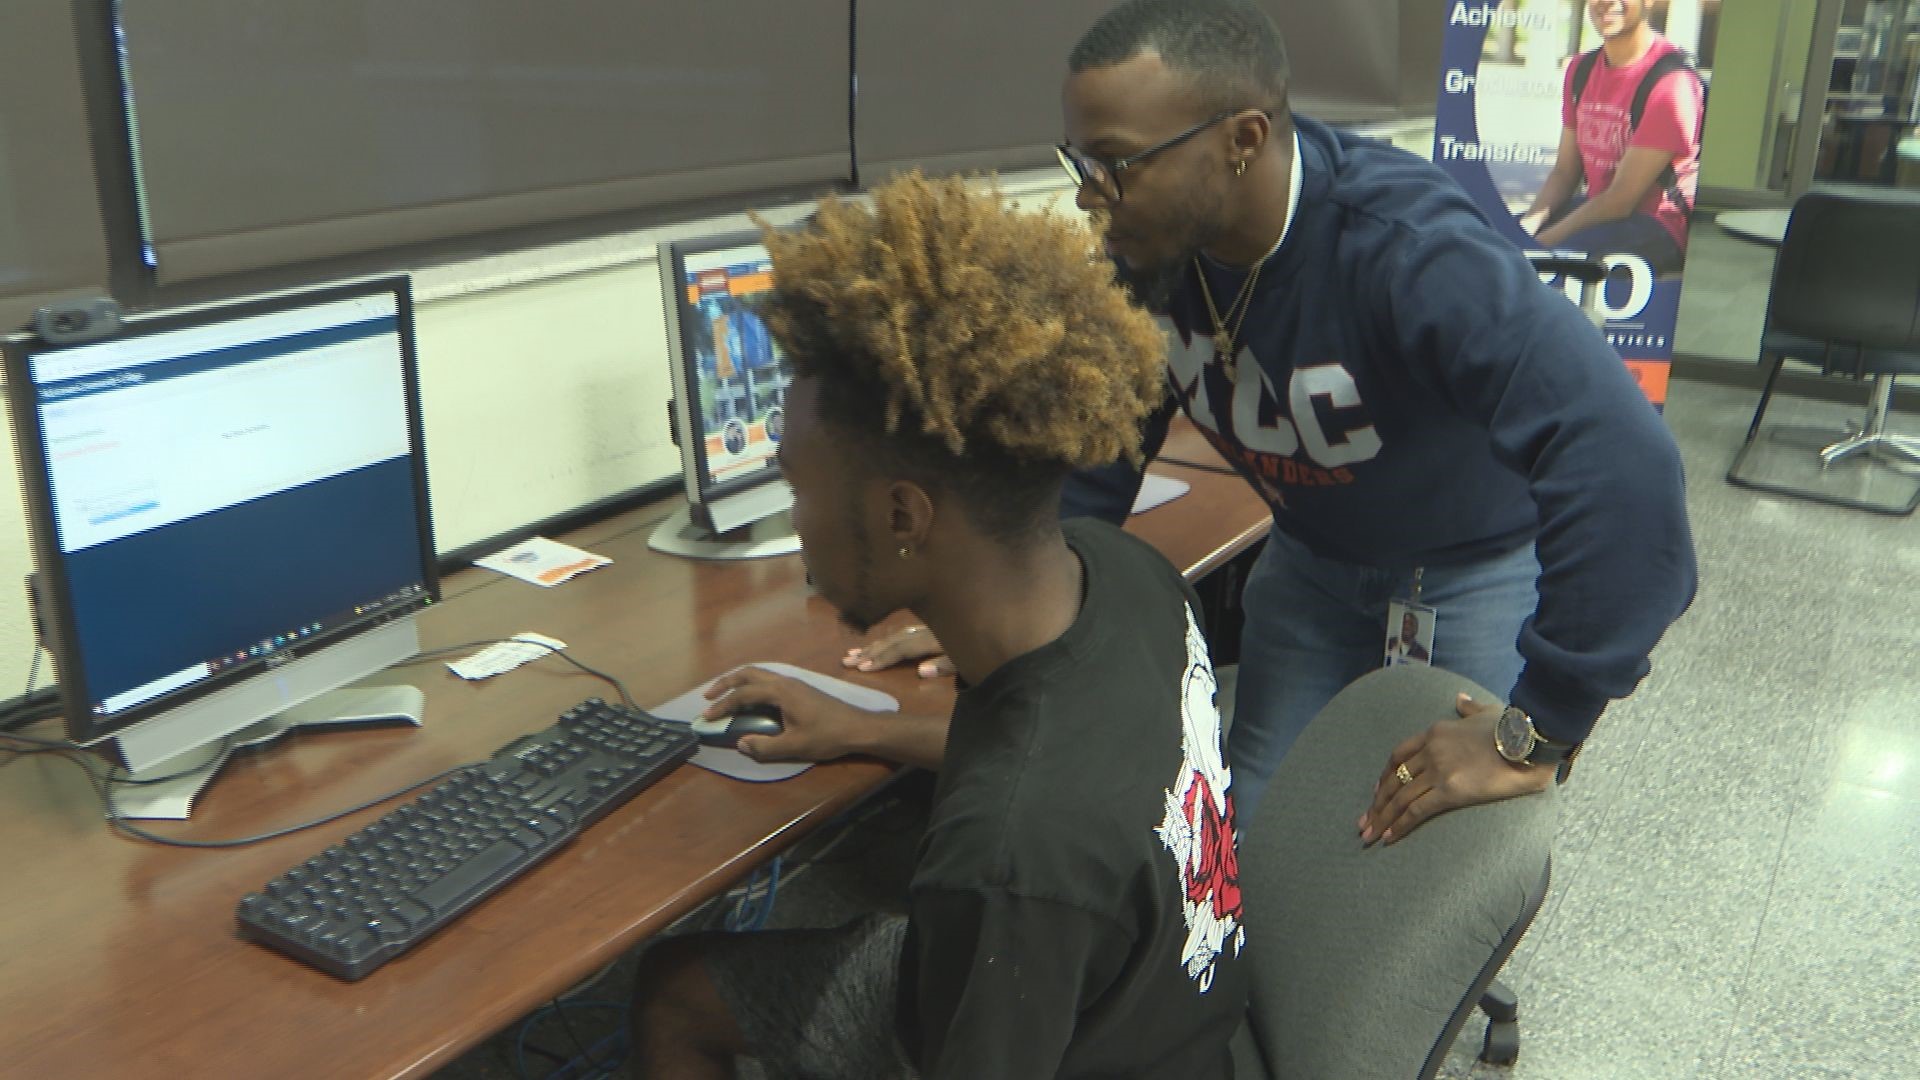 The Men of Color Success Initiative at McLennan community College not only aims to help students navigate higher education and thrive.